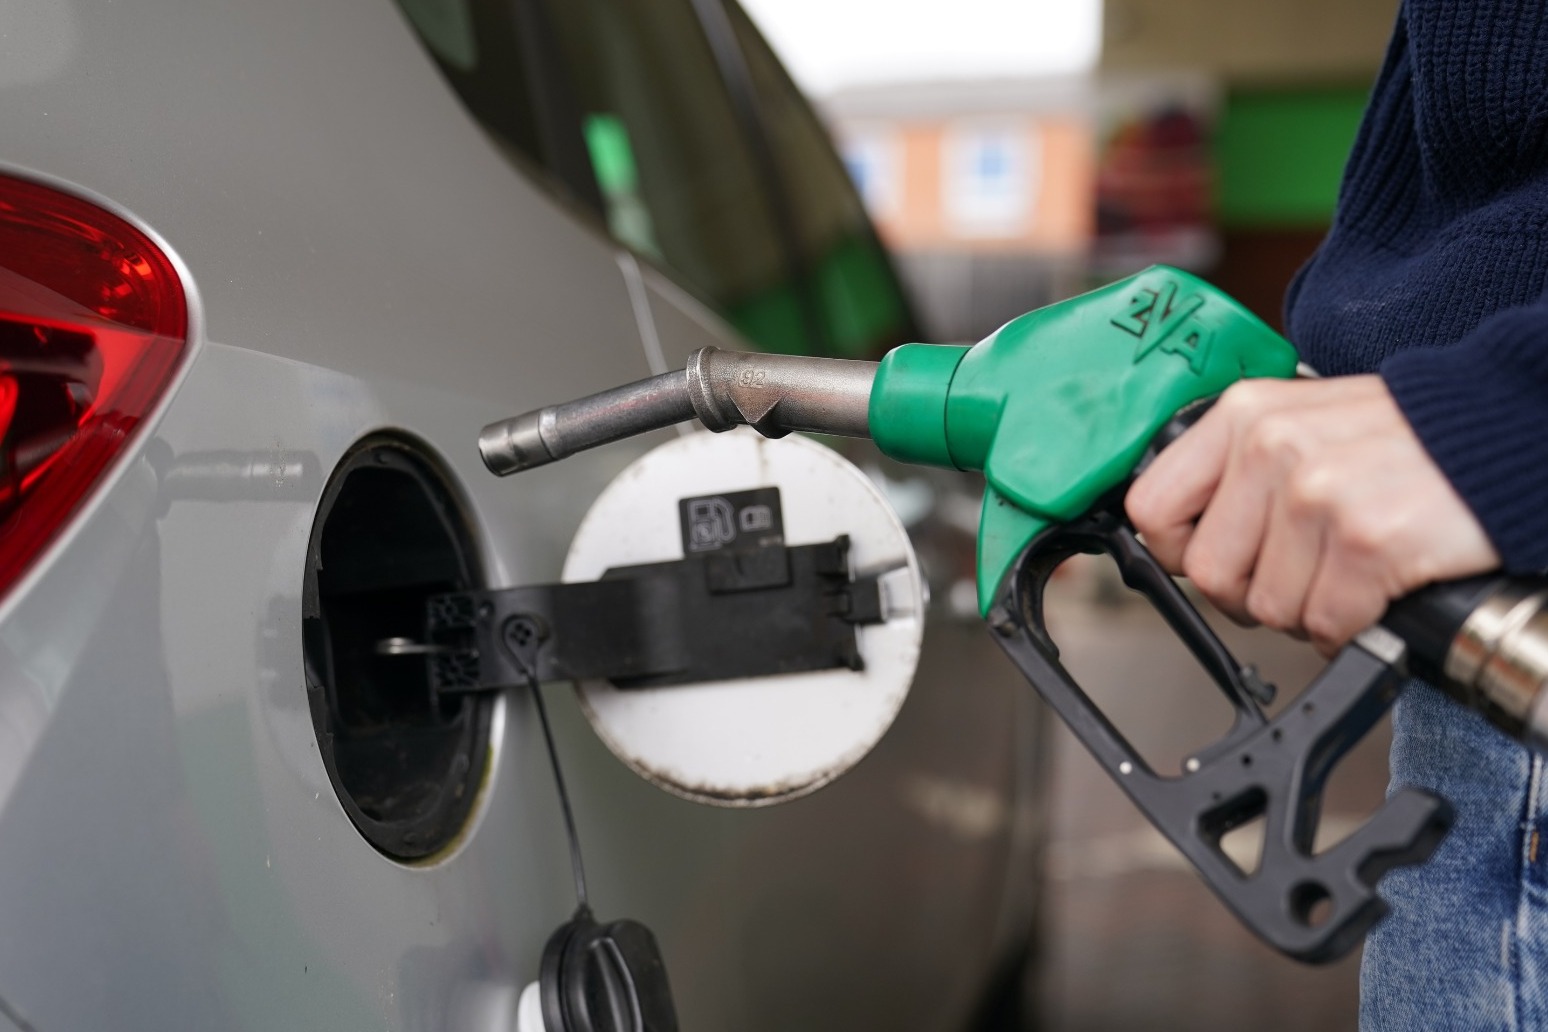 Average cost of petrol up nearly 3p per litre in a week 